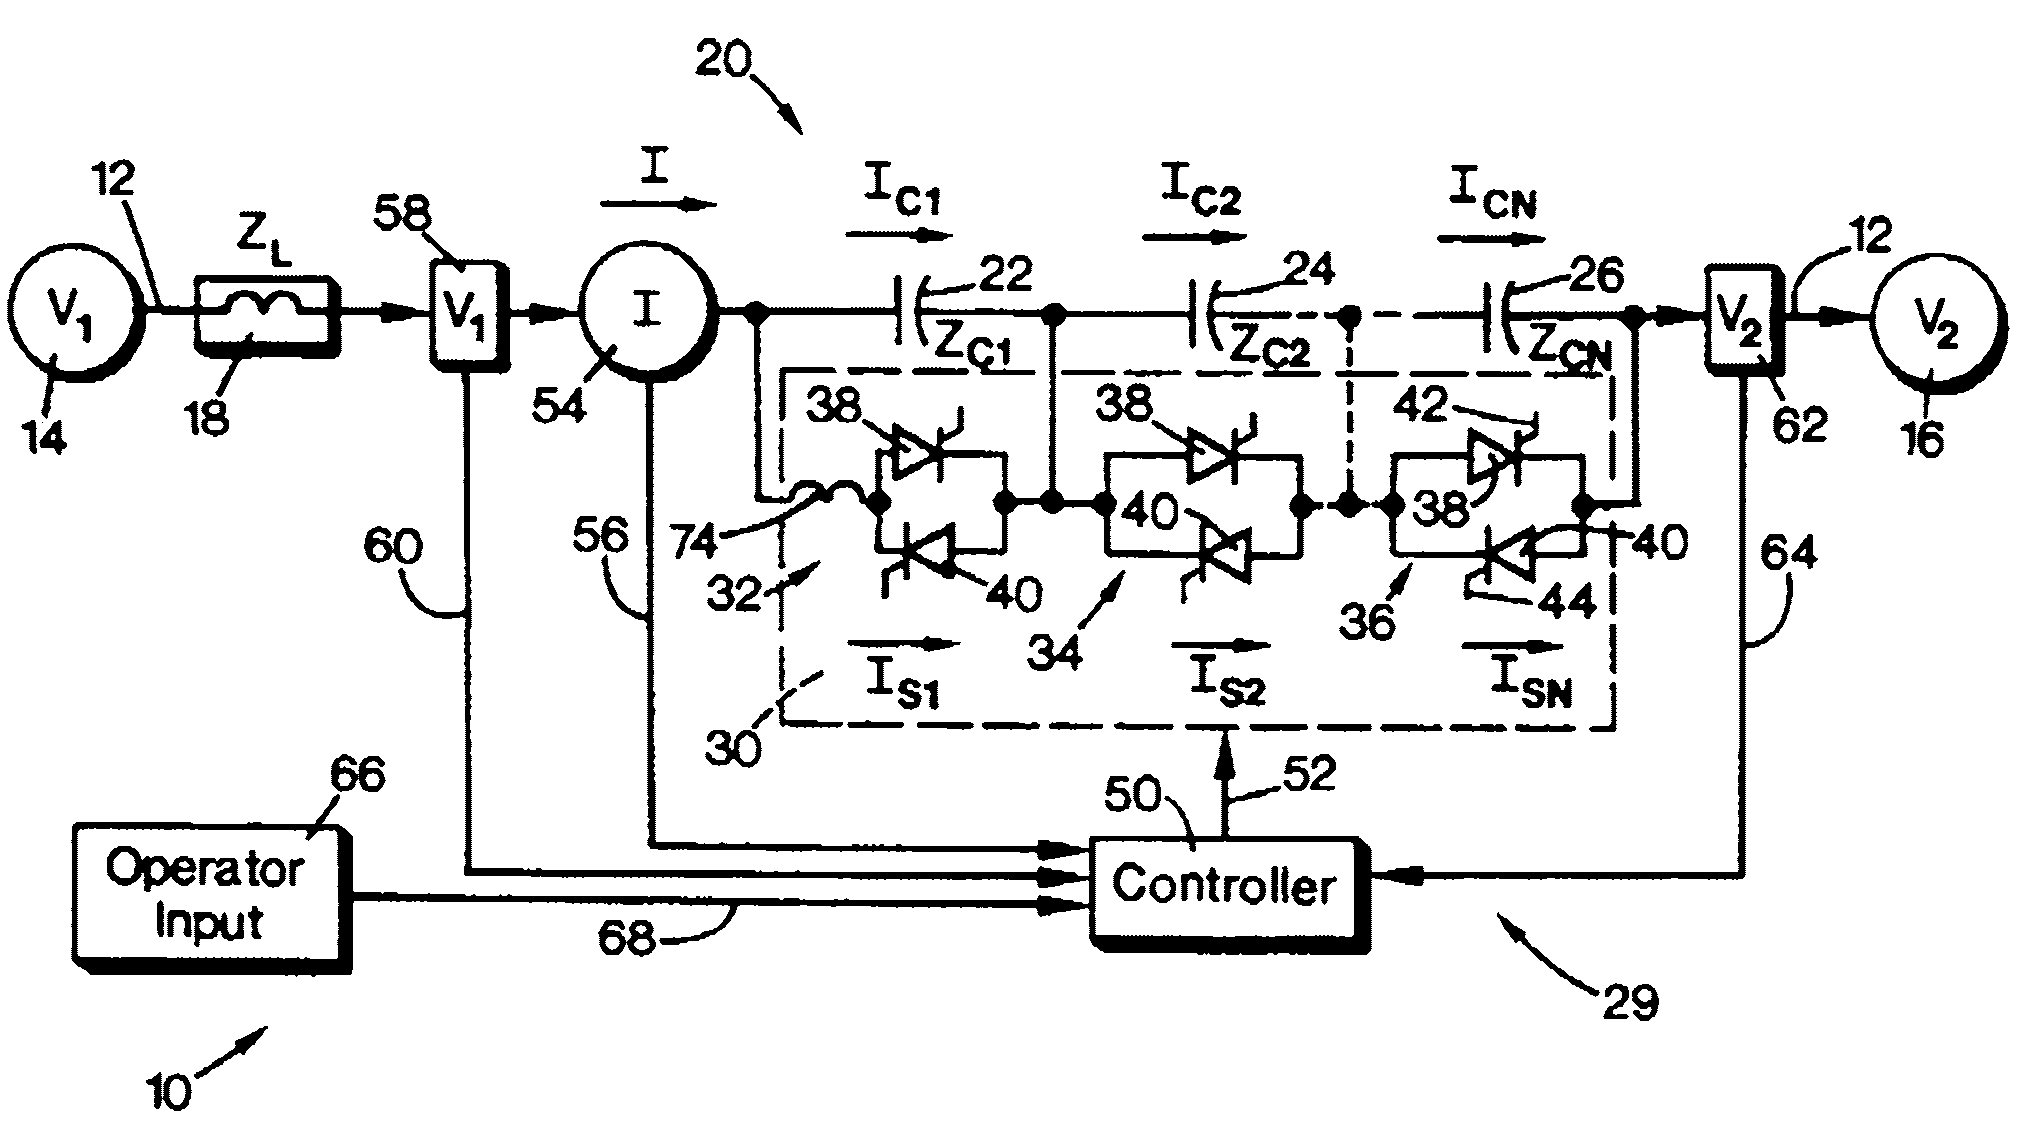 Power flow controller with failure current limiting function